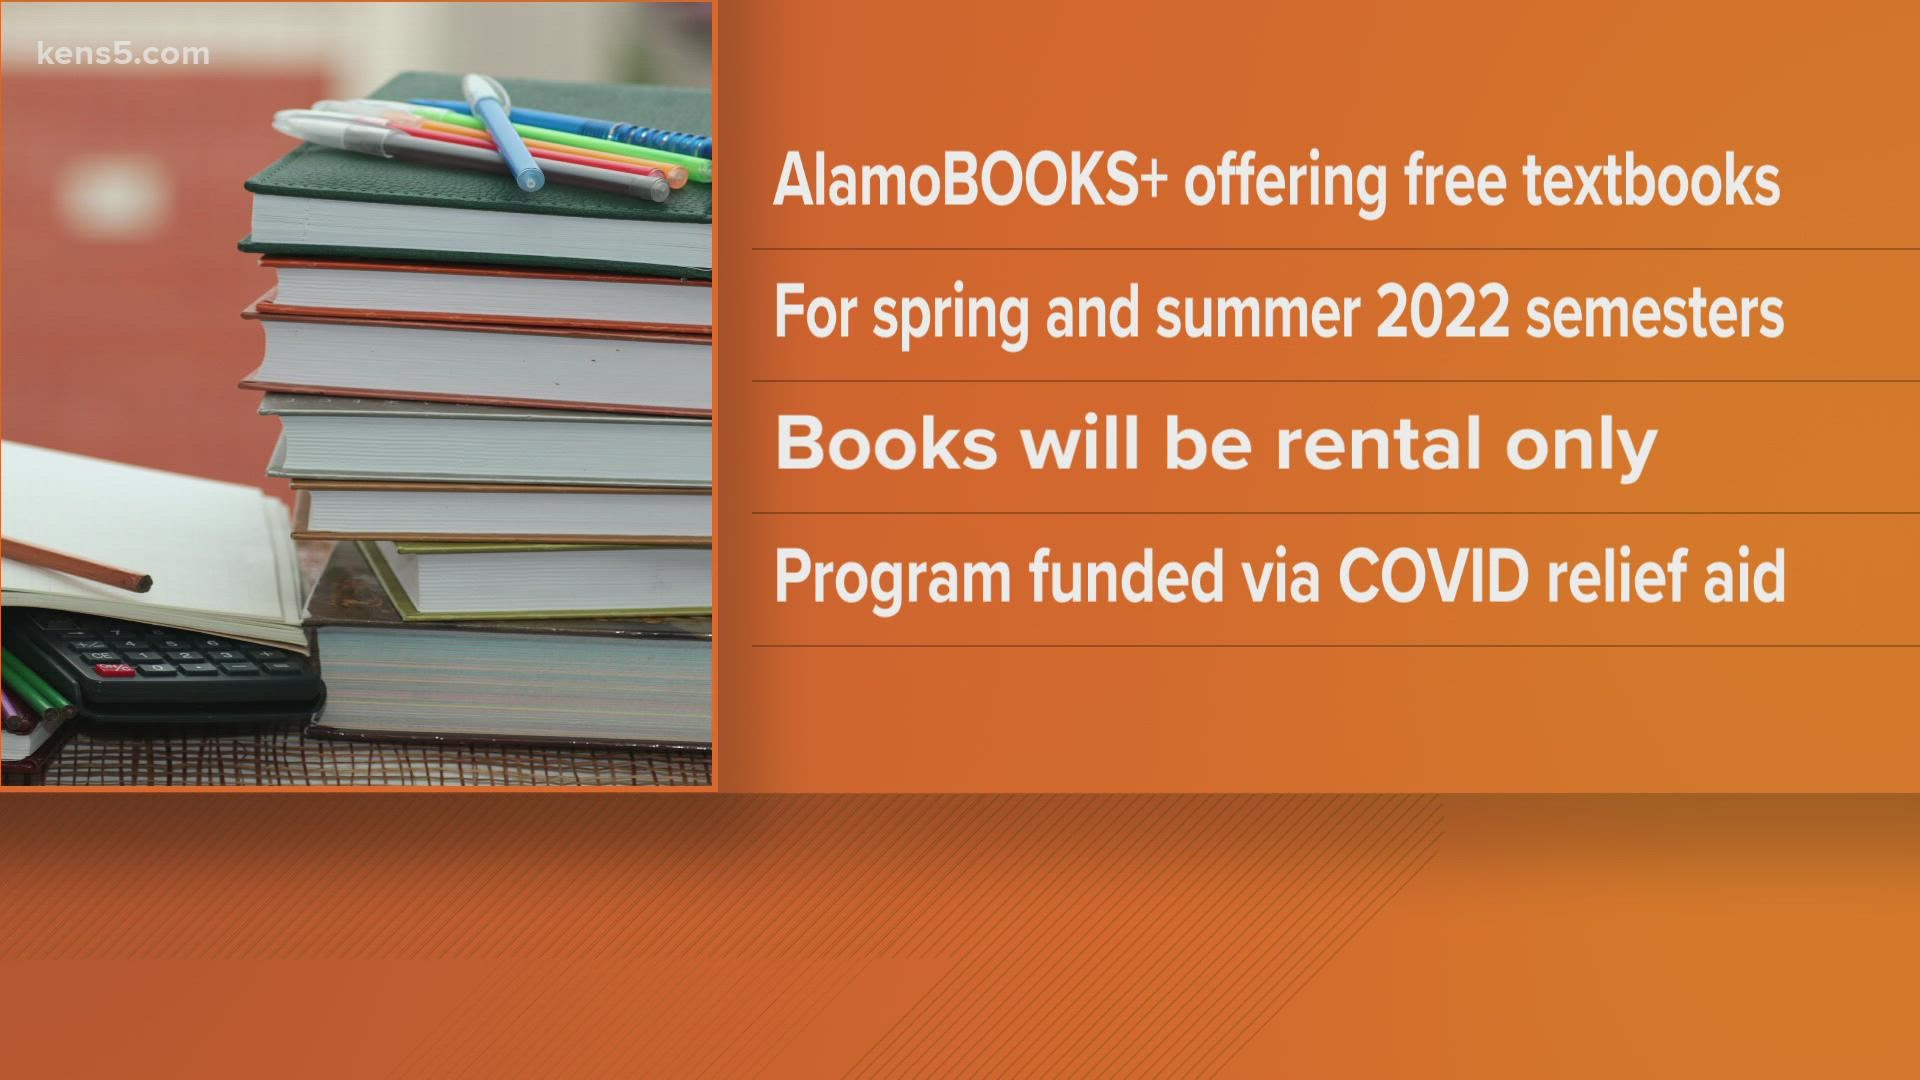 AlamoBOOKS+ is covering the costs of the rentals for all students for the spring and summer semesters of 2022.